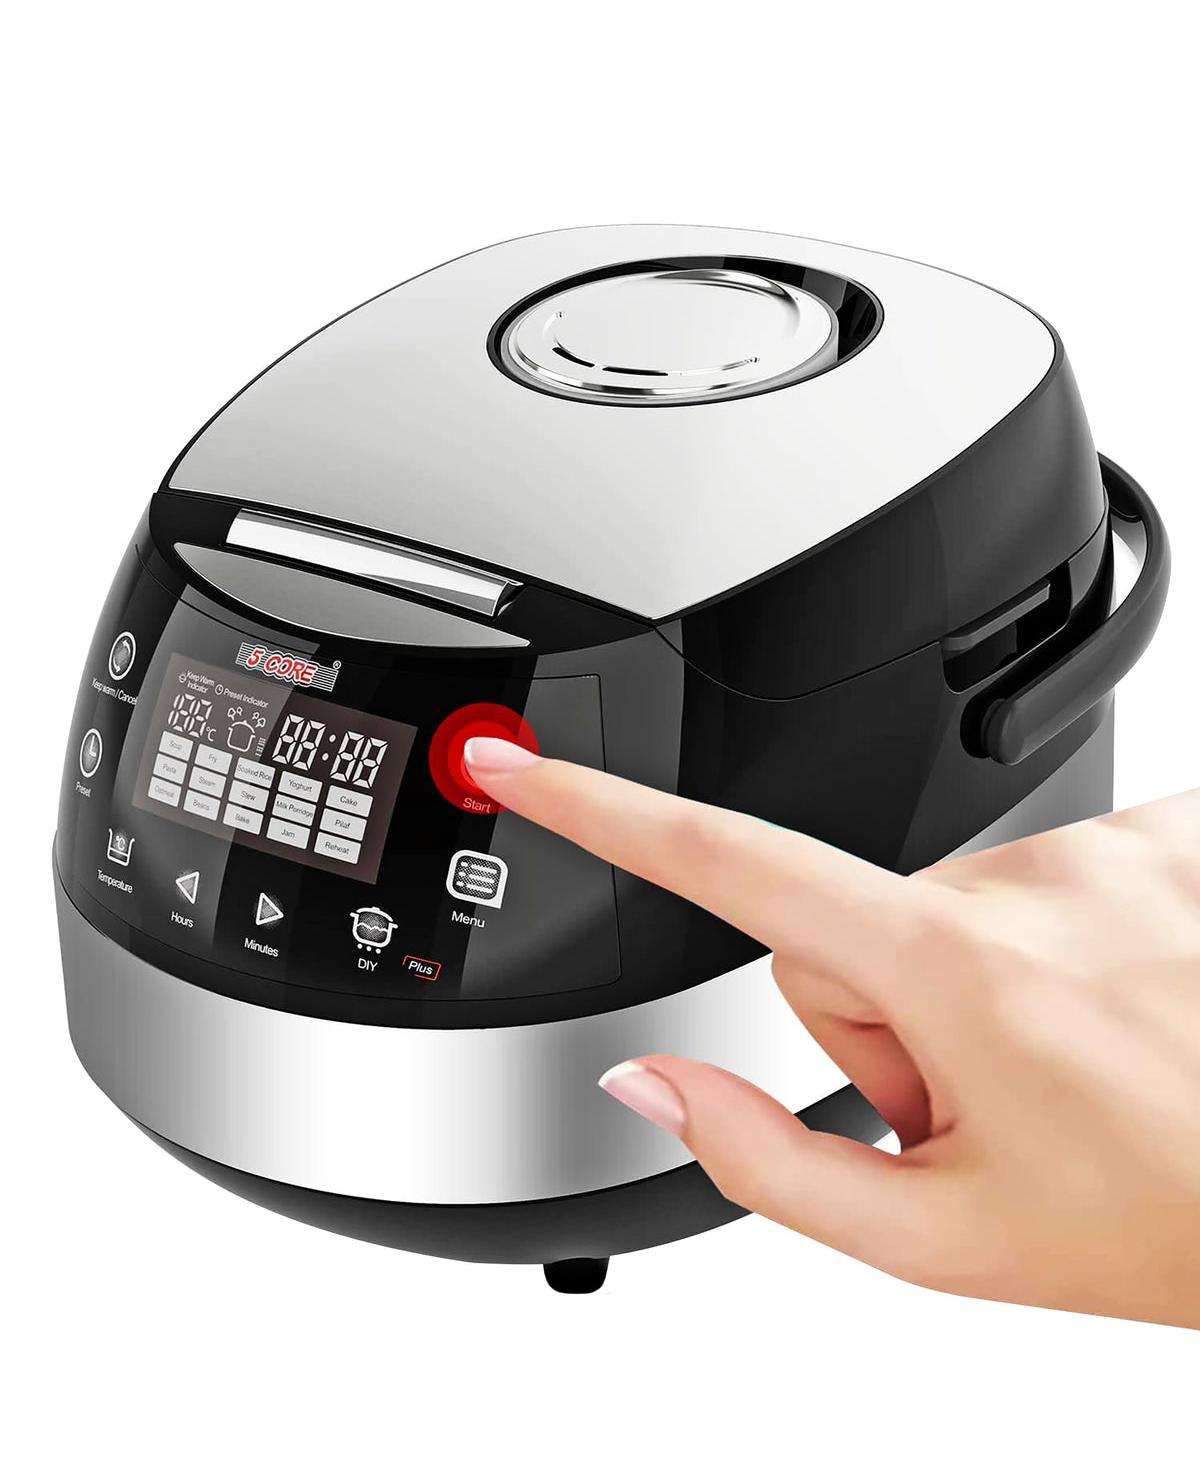 Asian Rice Cooker Electric Japanese Rice Maker w 17 Preset Touch Screen Nonstick Inner Pot Rc 0501 - Grey